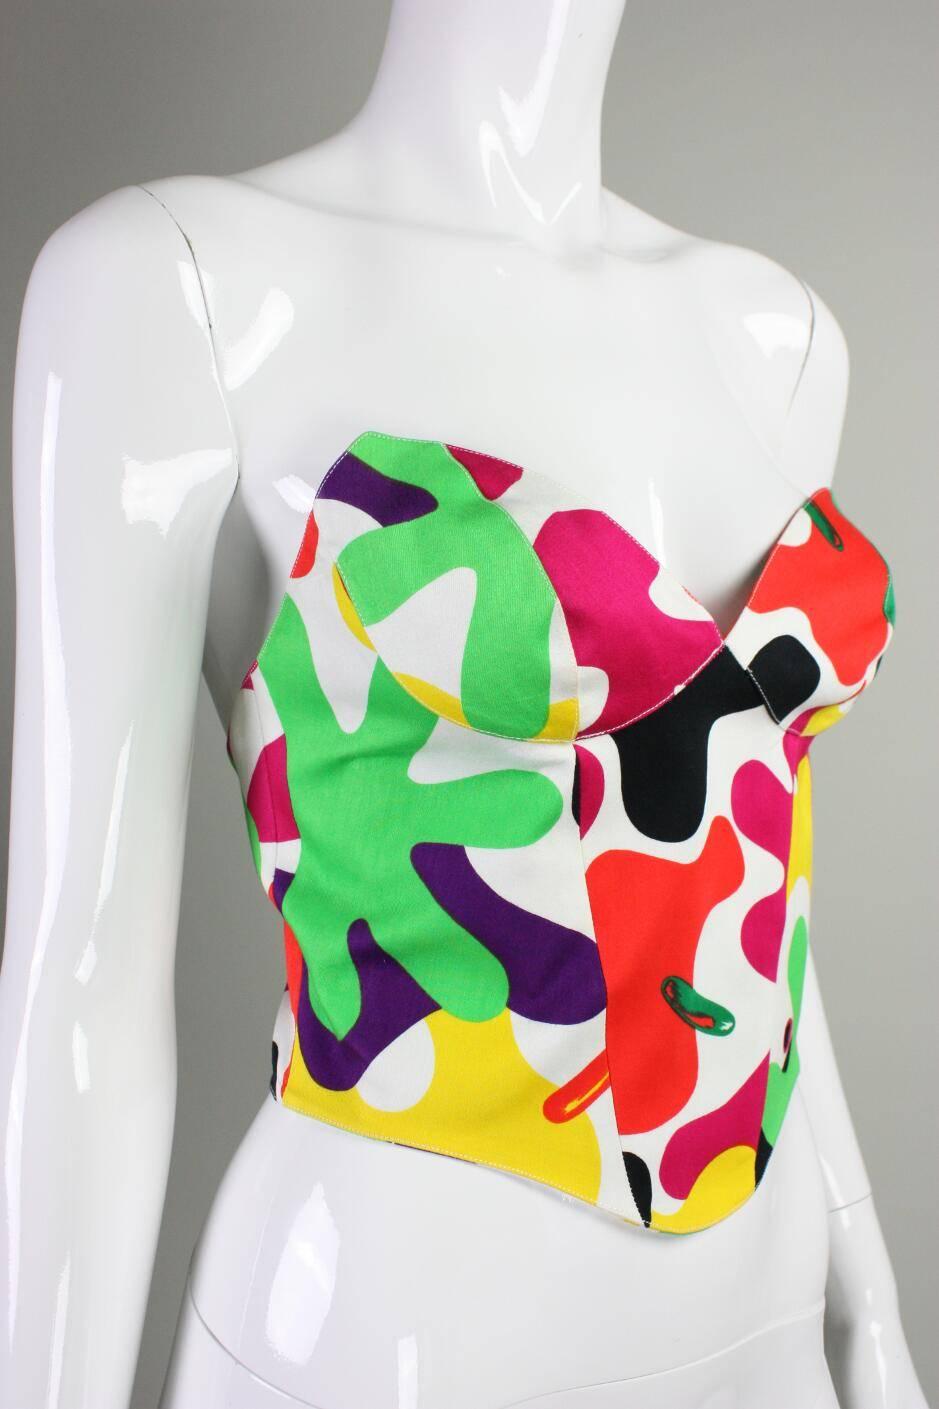 Vintage bustier from Thierry Mugler likely dates to the 1990's.  It is made of white cotton sateen with a colorful camouflage print.  Center back hook and eye closures.  Lined with self fabric. 

Labeled a French size 38.

Measurements

Bust: